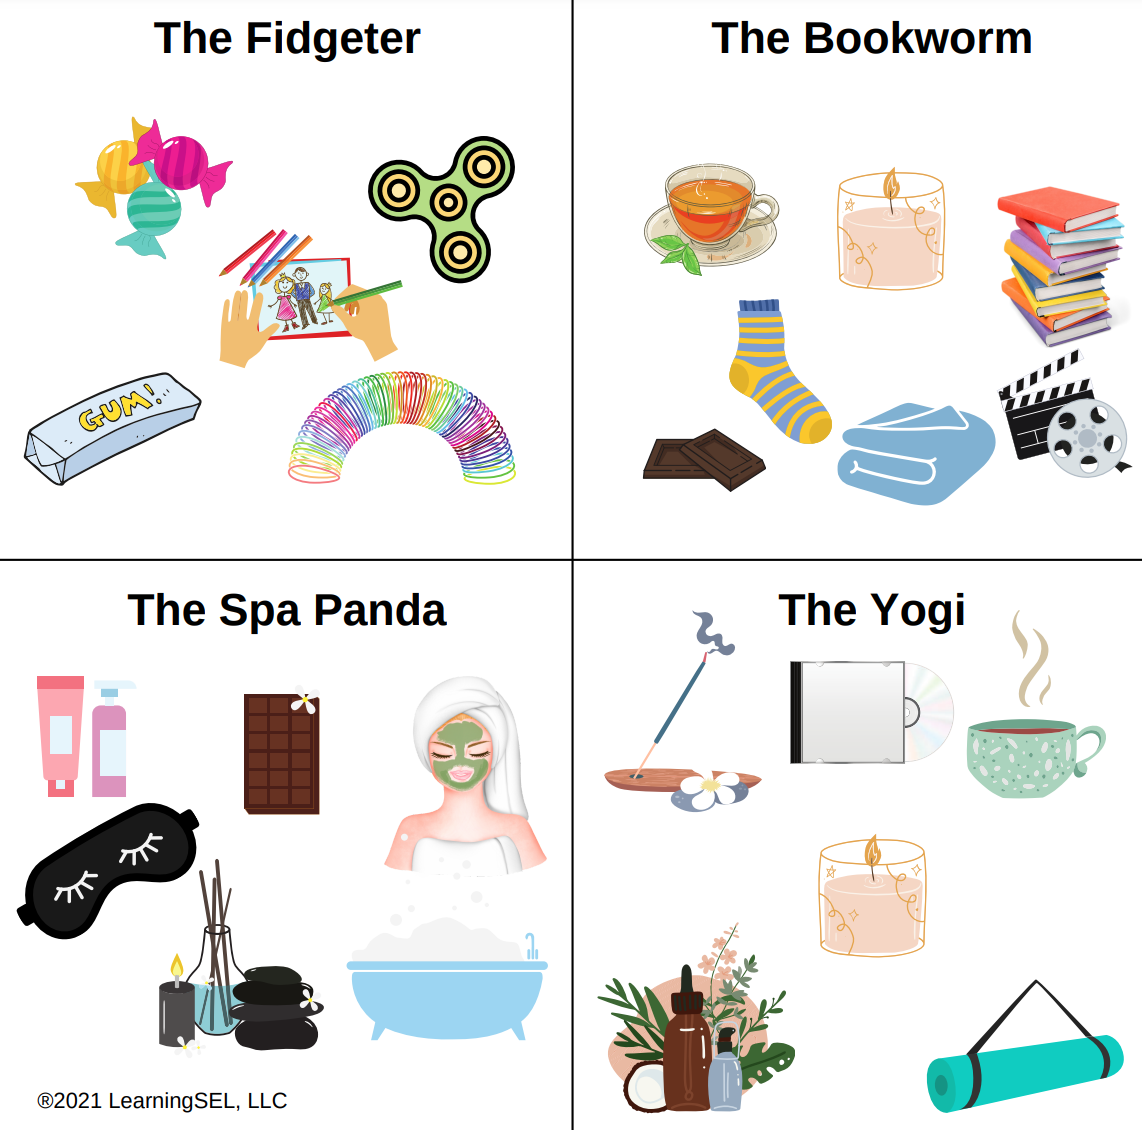 Treat Yourself! Create Your Own Self-Care Kit